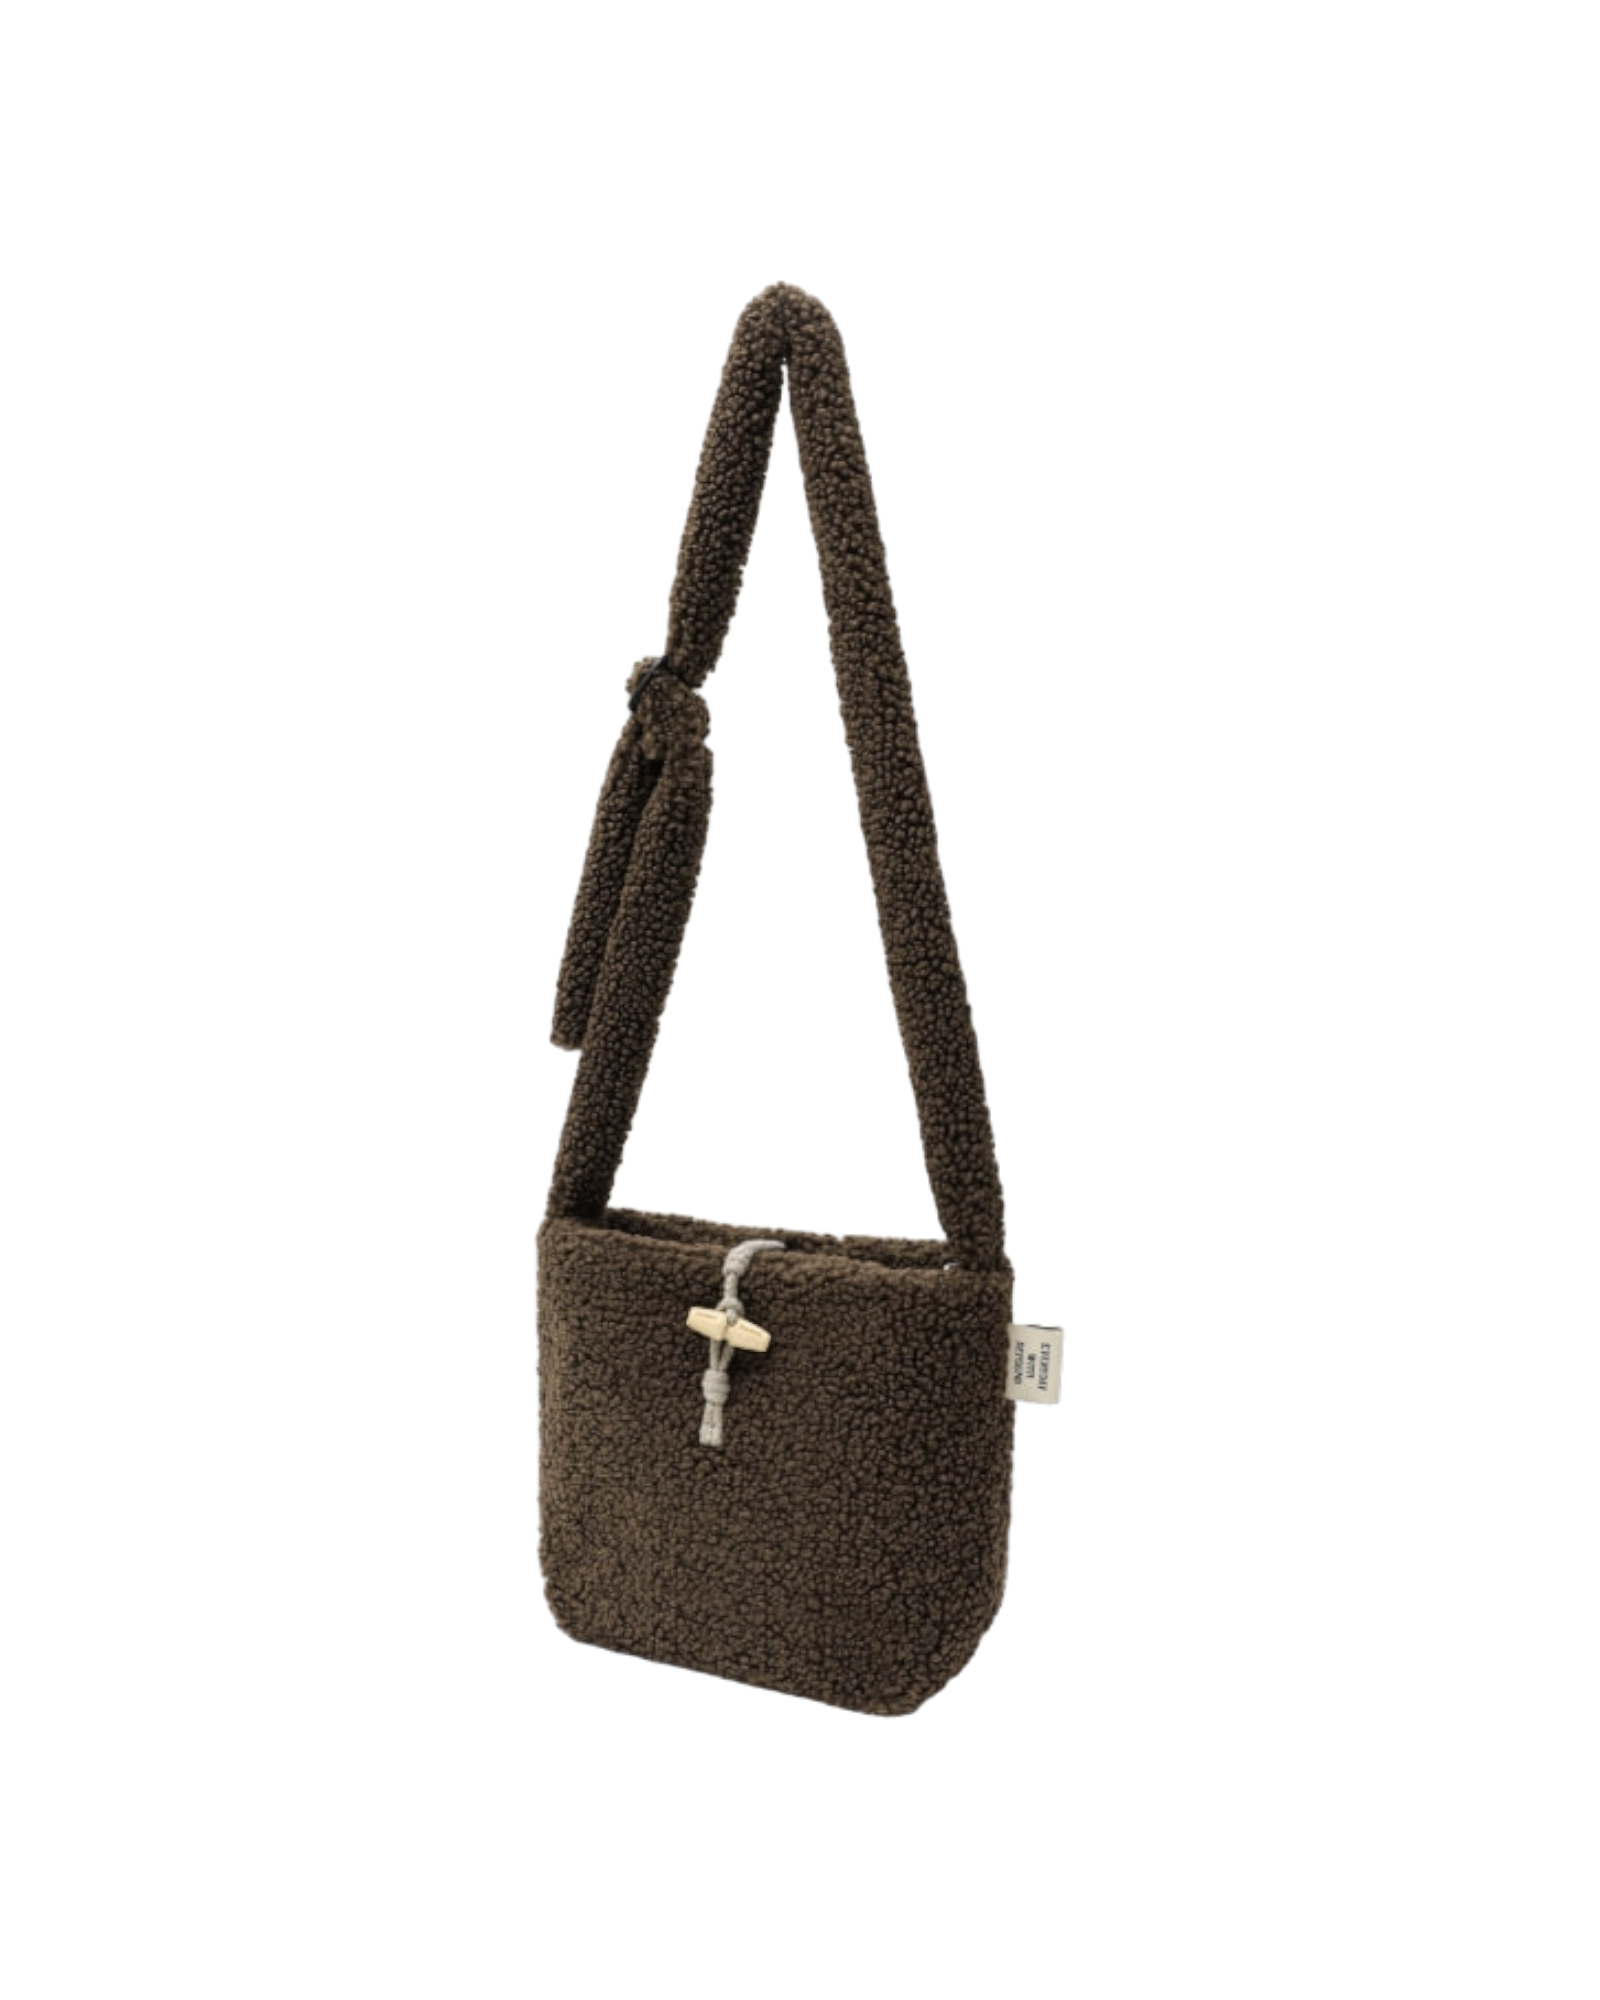 Poodle Bag (cross-body) In Cocoa